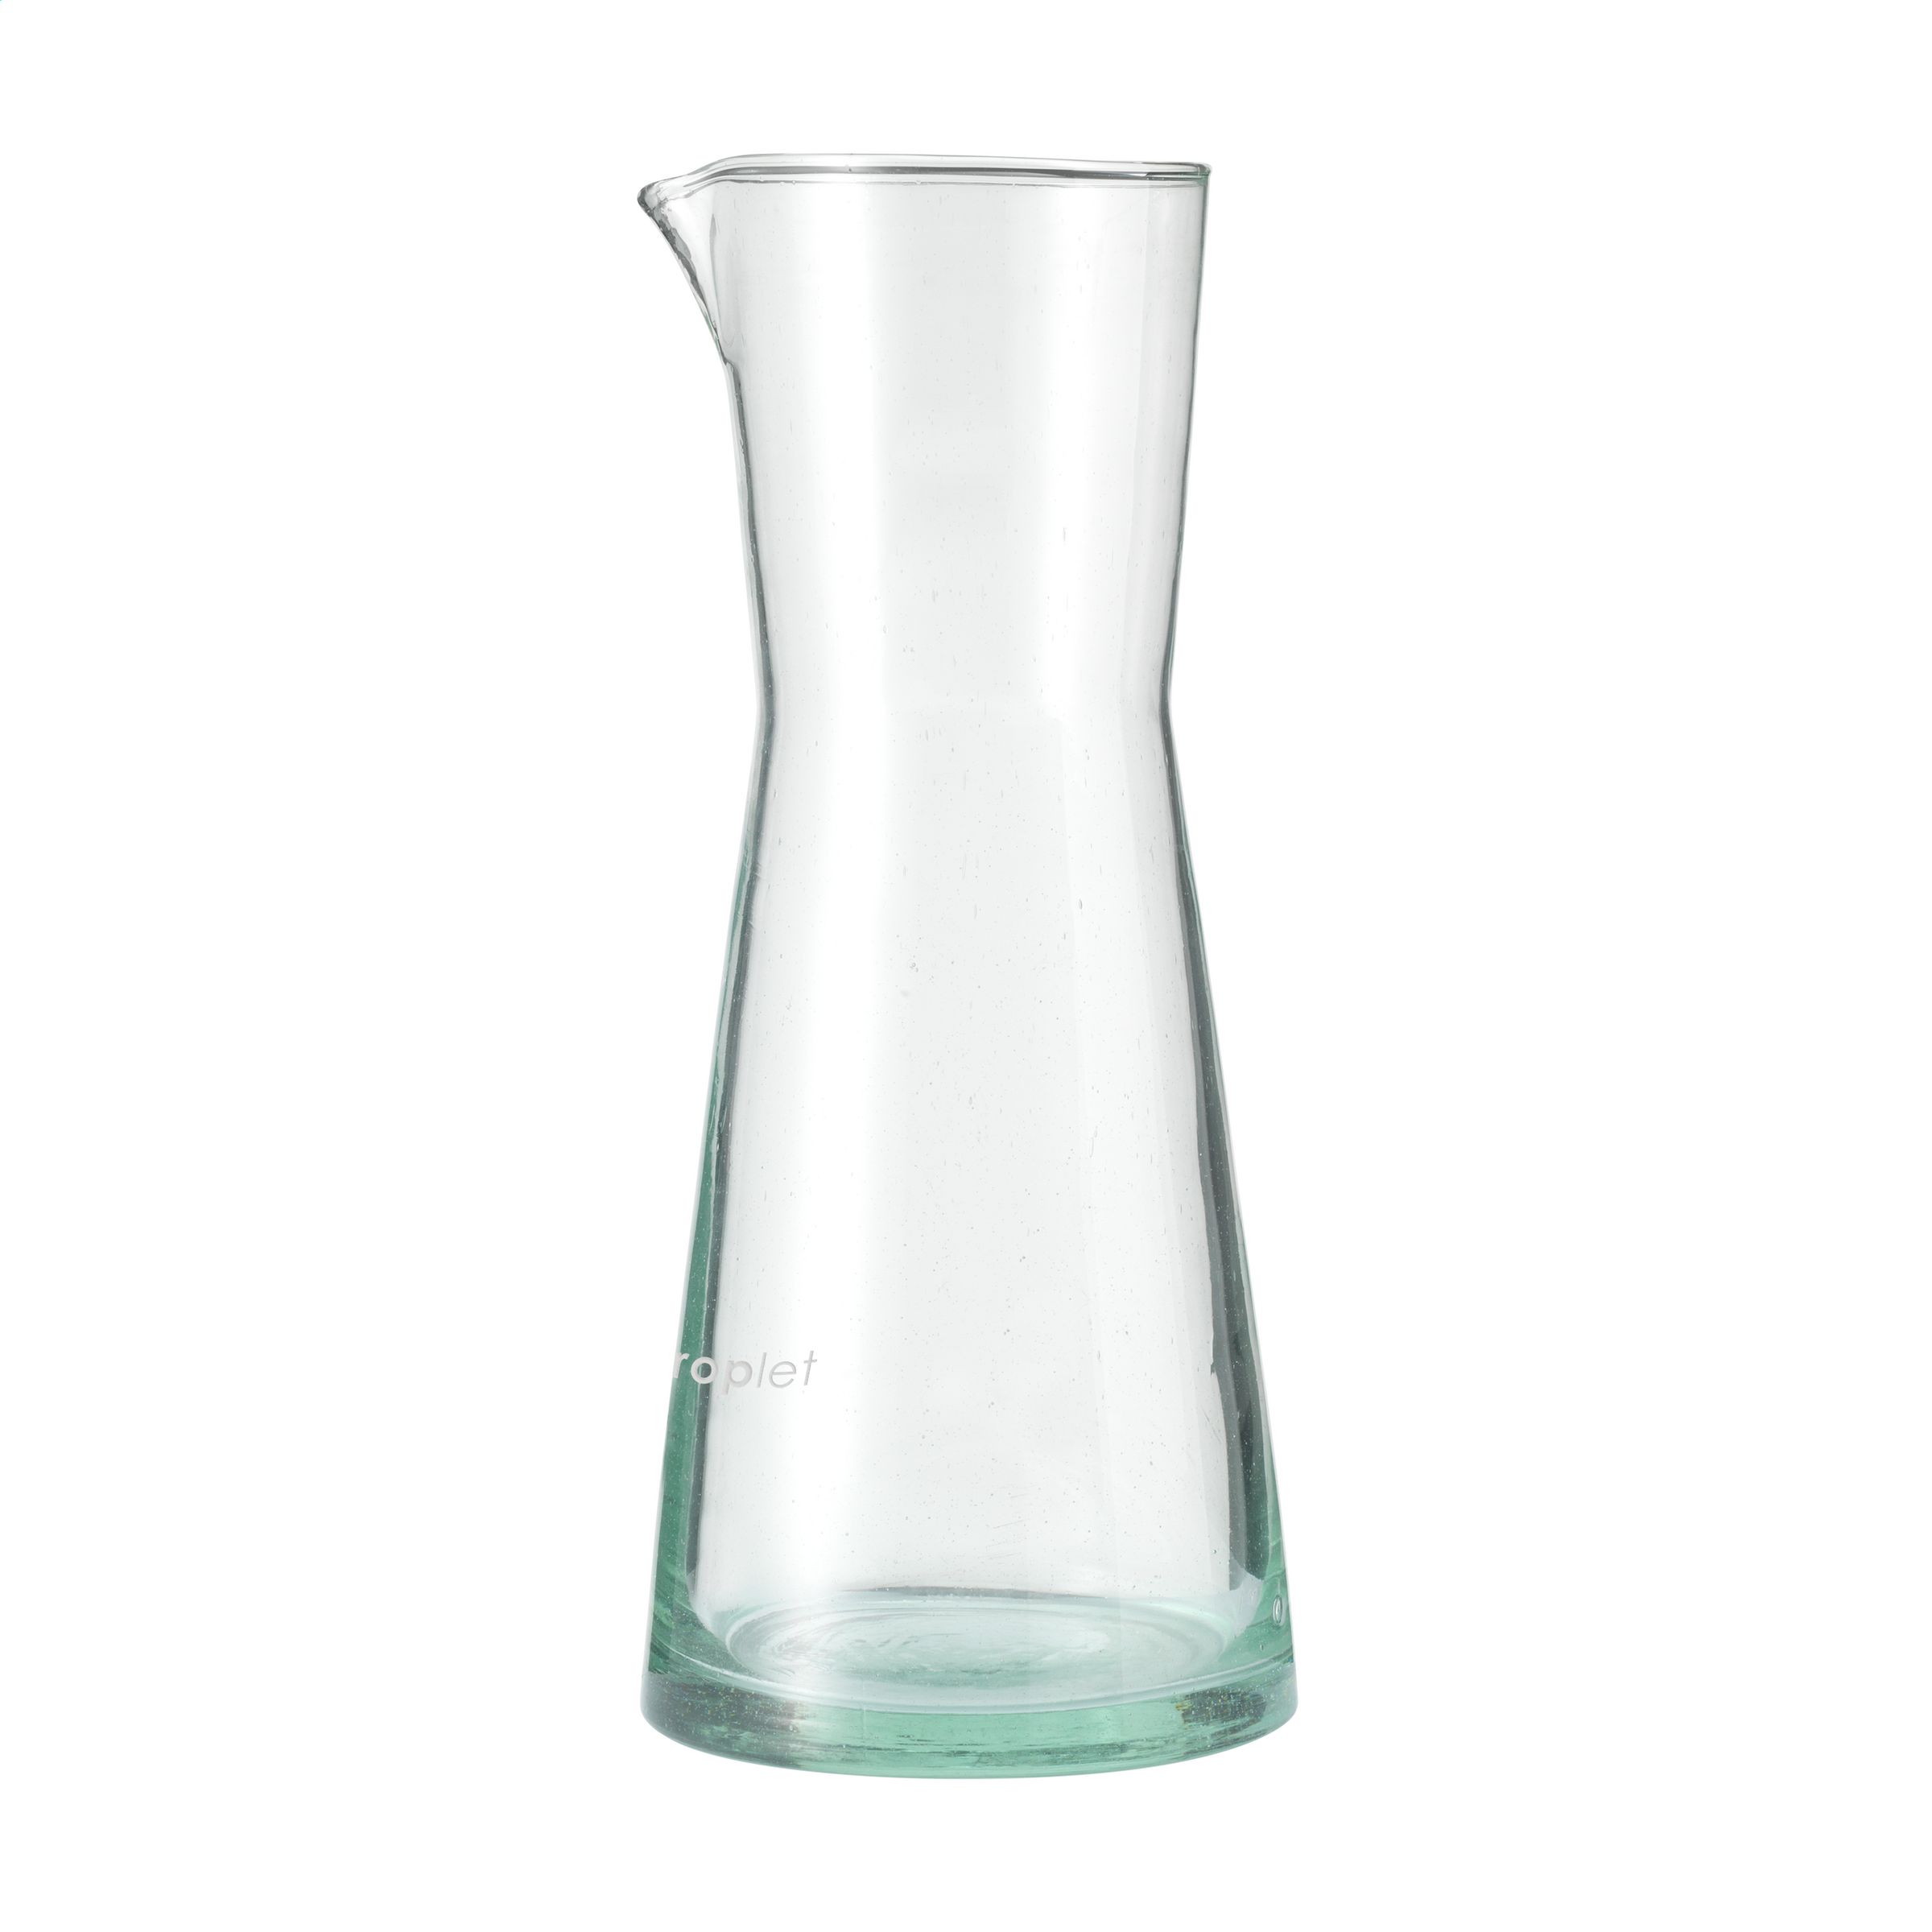 Eco-Friendly Recycled Glass Carafe - Chipping Sodbury